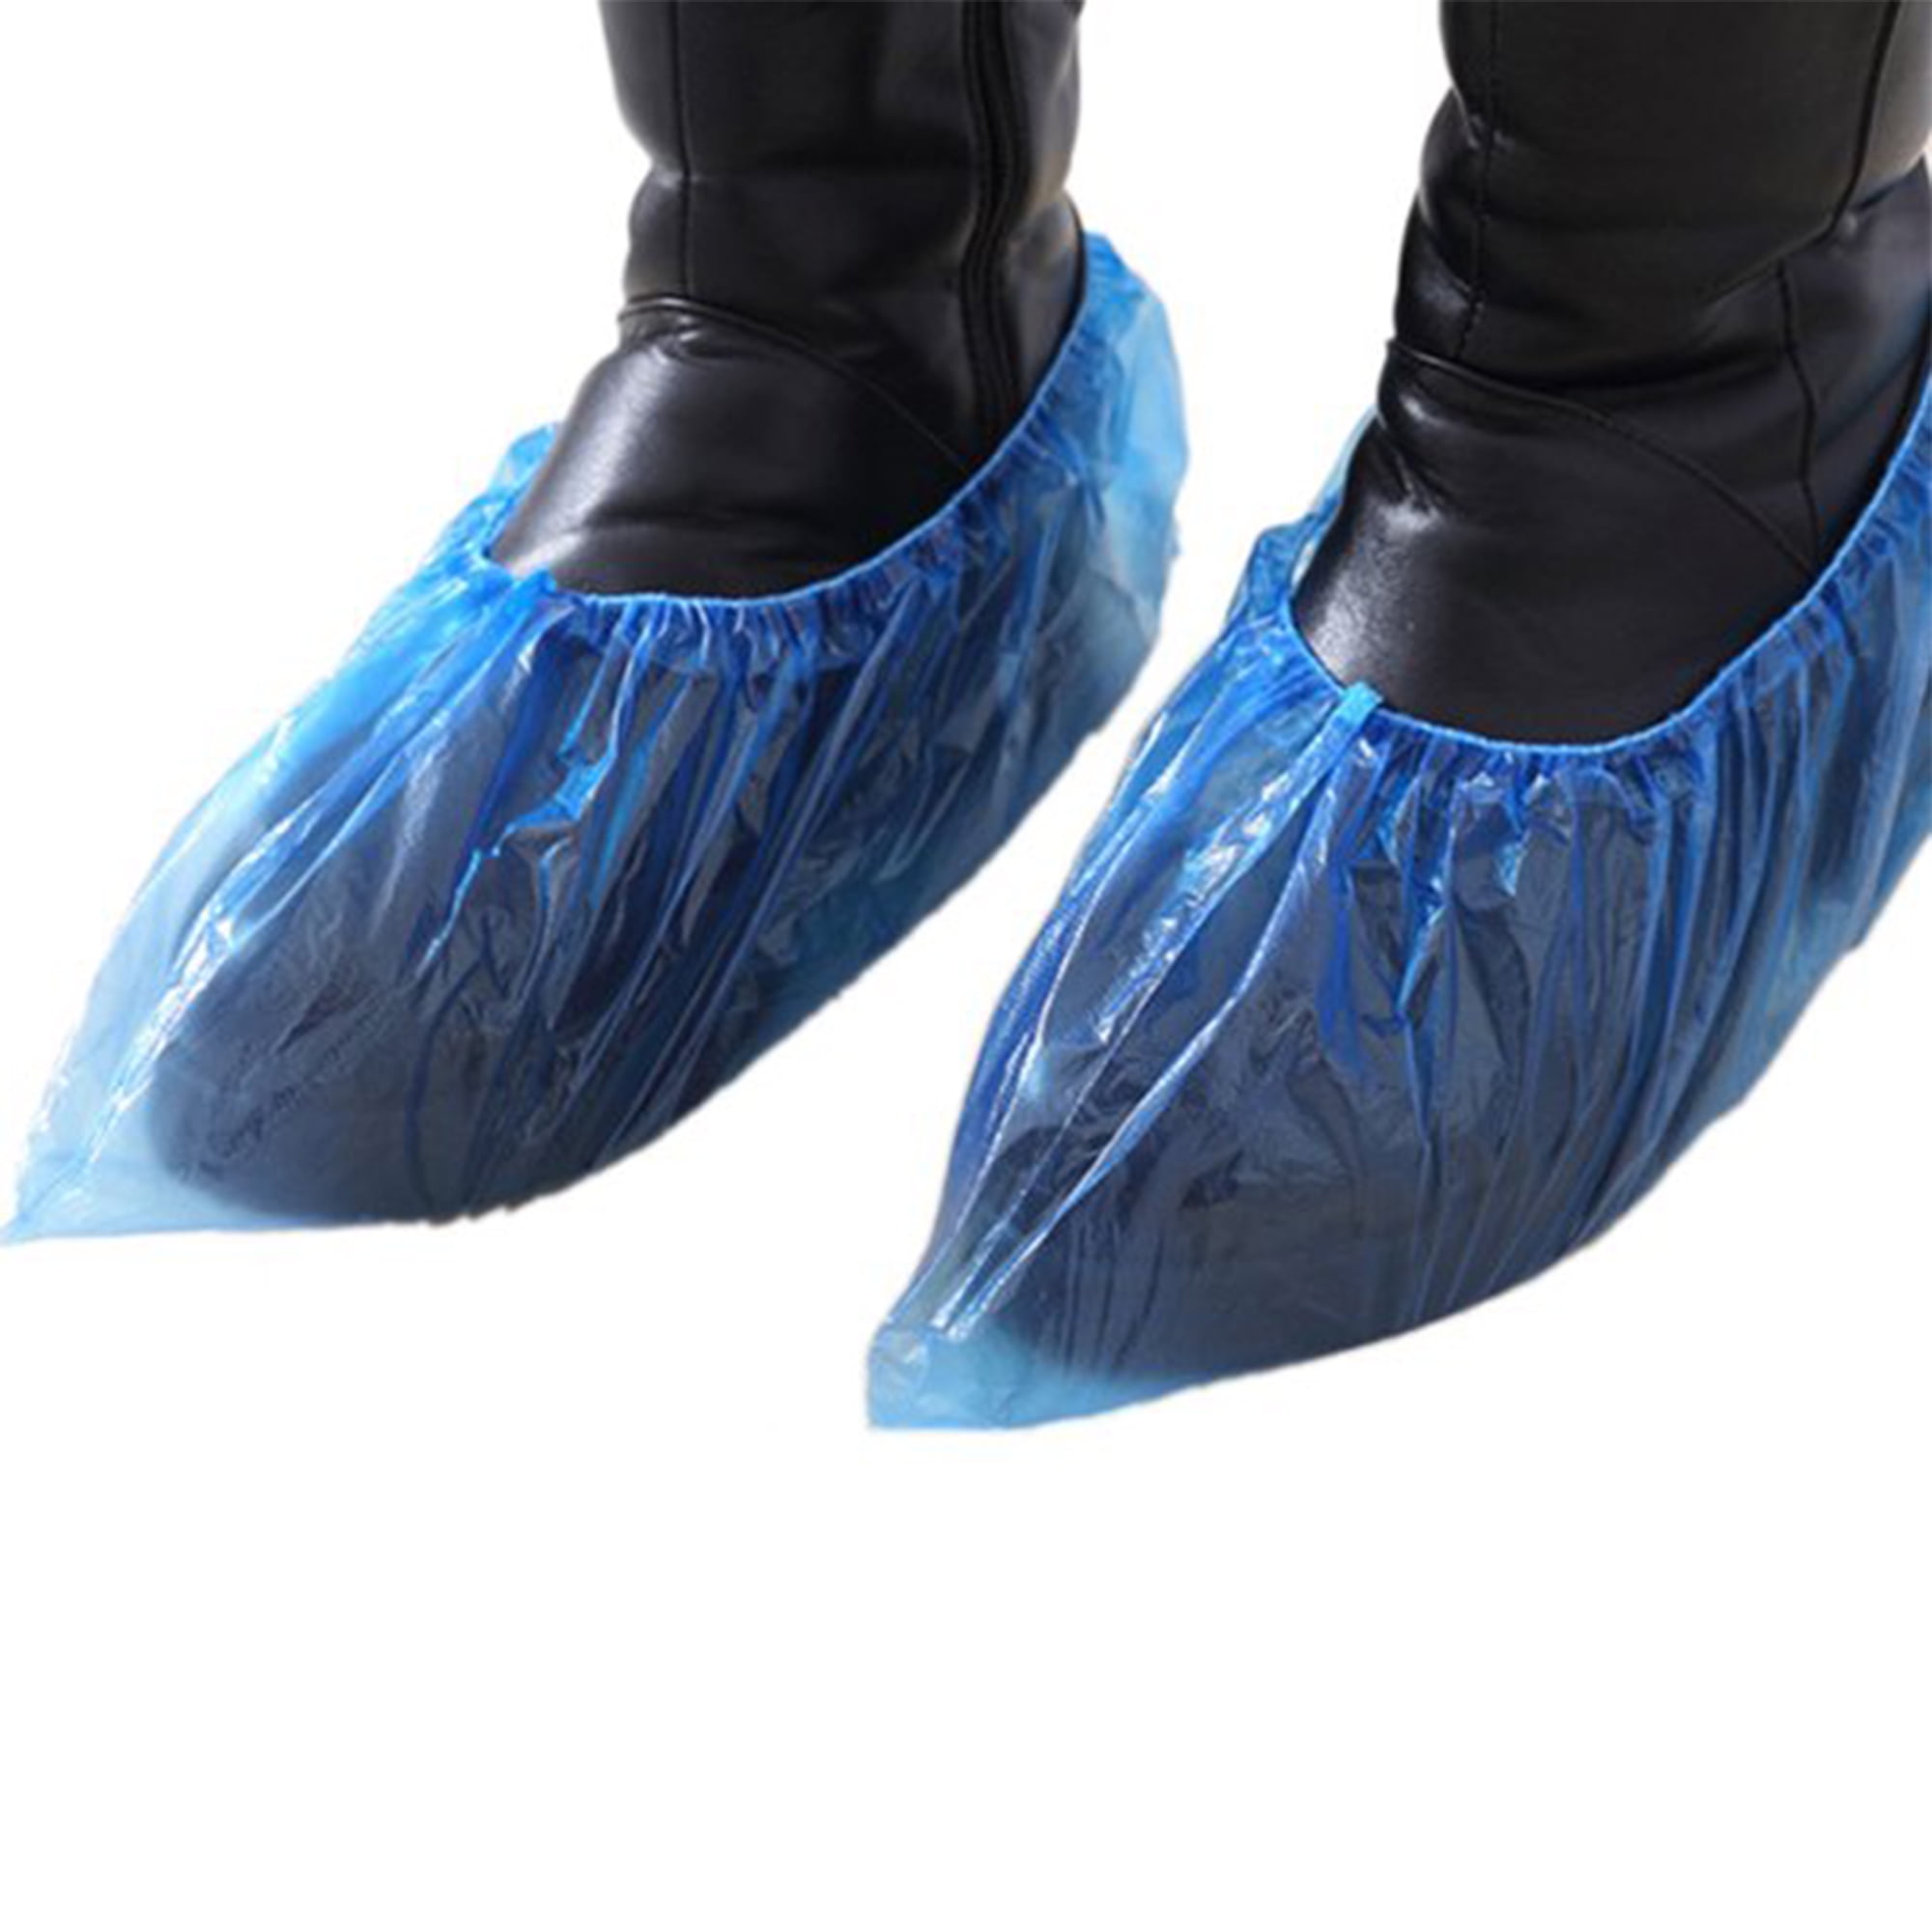 100 Pcs Boot Covers Disposable Shoe Thick Overshoes Floor Protectors Waterproof 